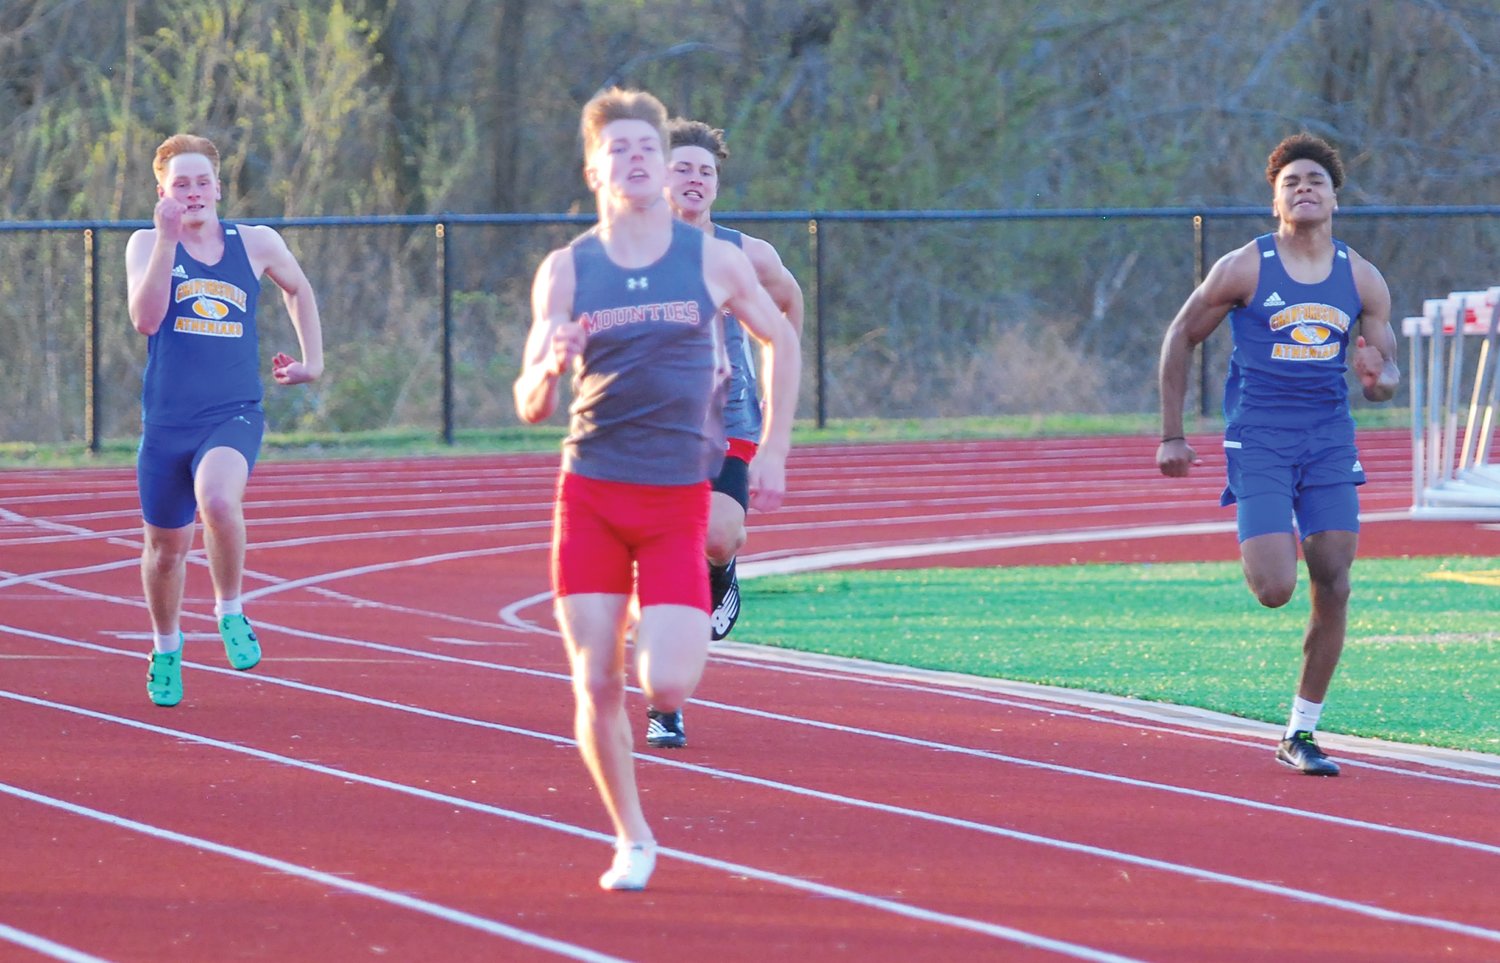 Southmont junior Trent Jones is headed to the state finals in the 400 meter dash.